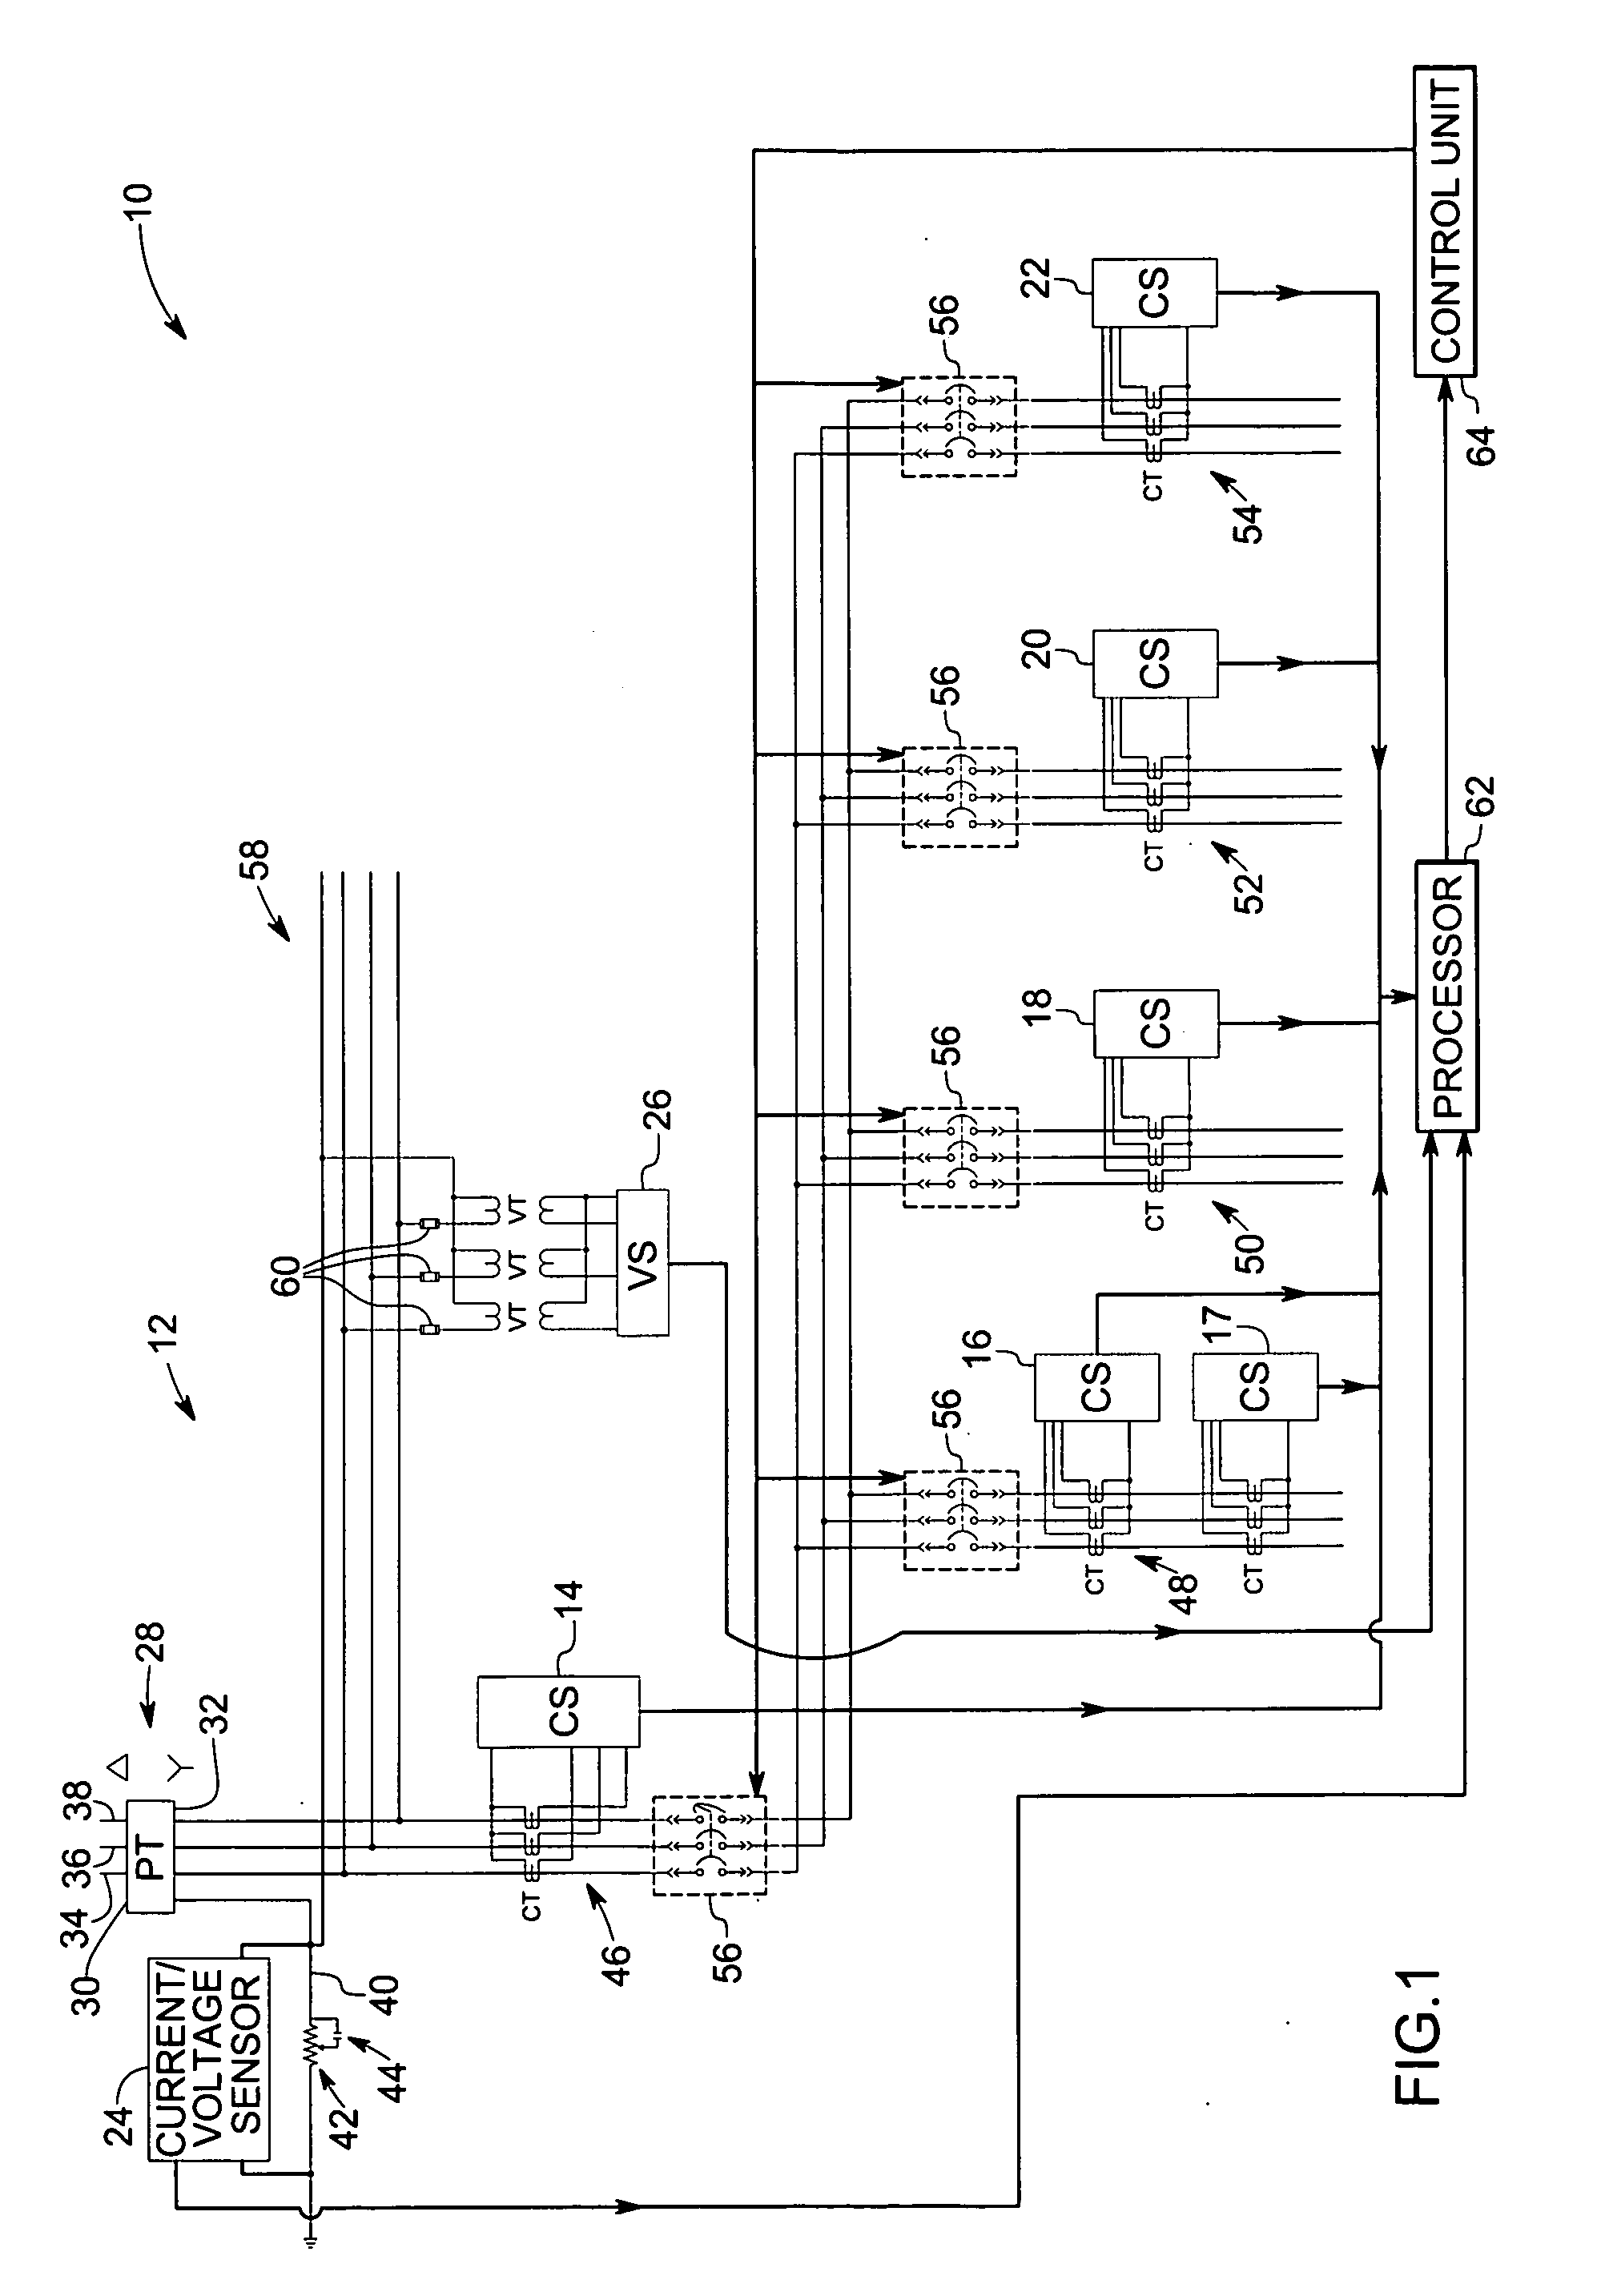 System and method of locating ground fault in electrical power distribution system